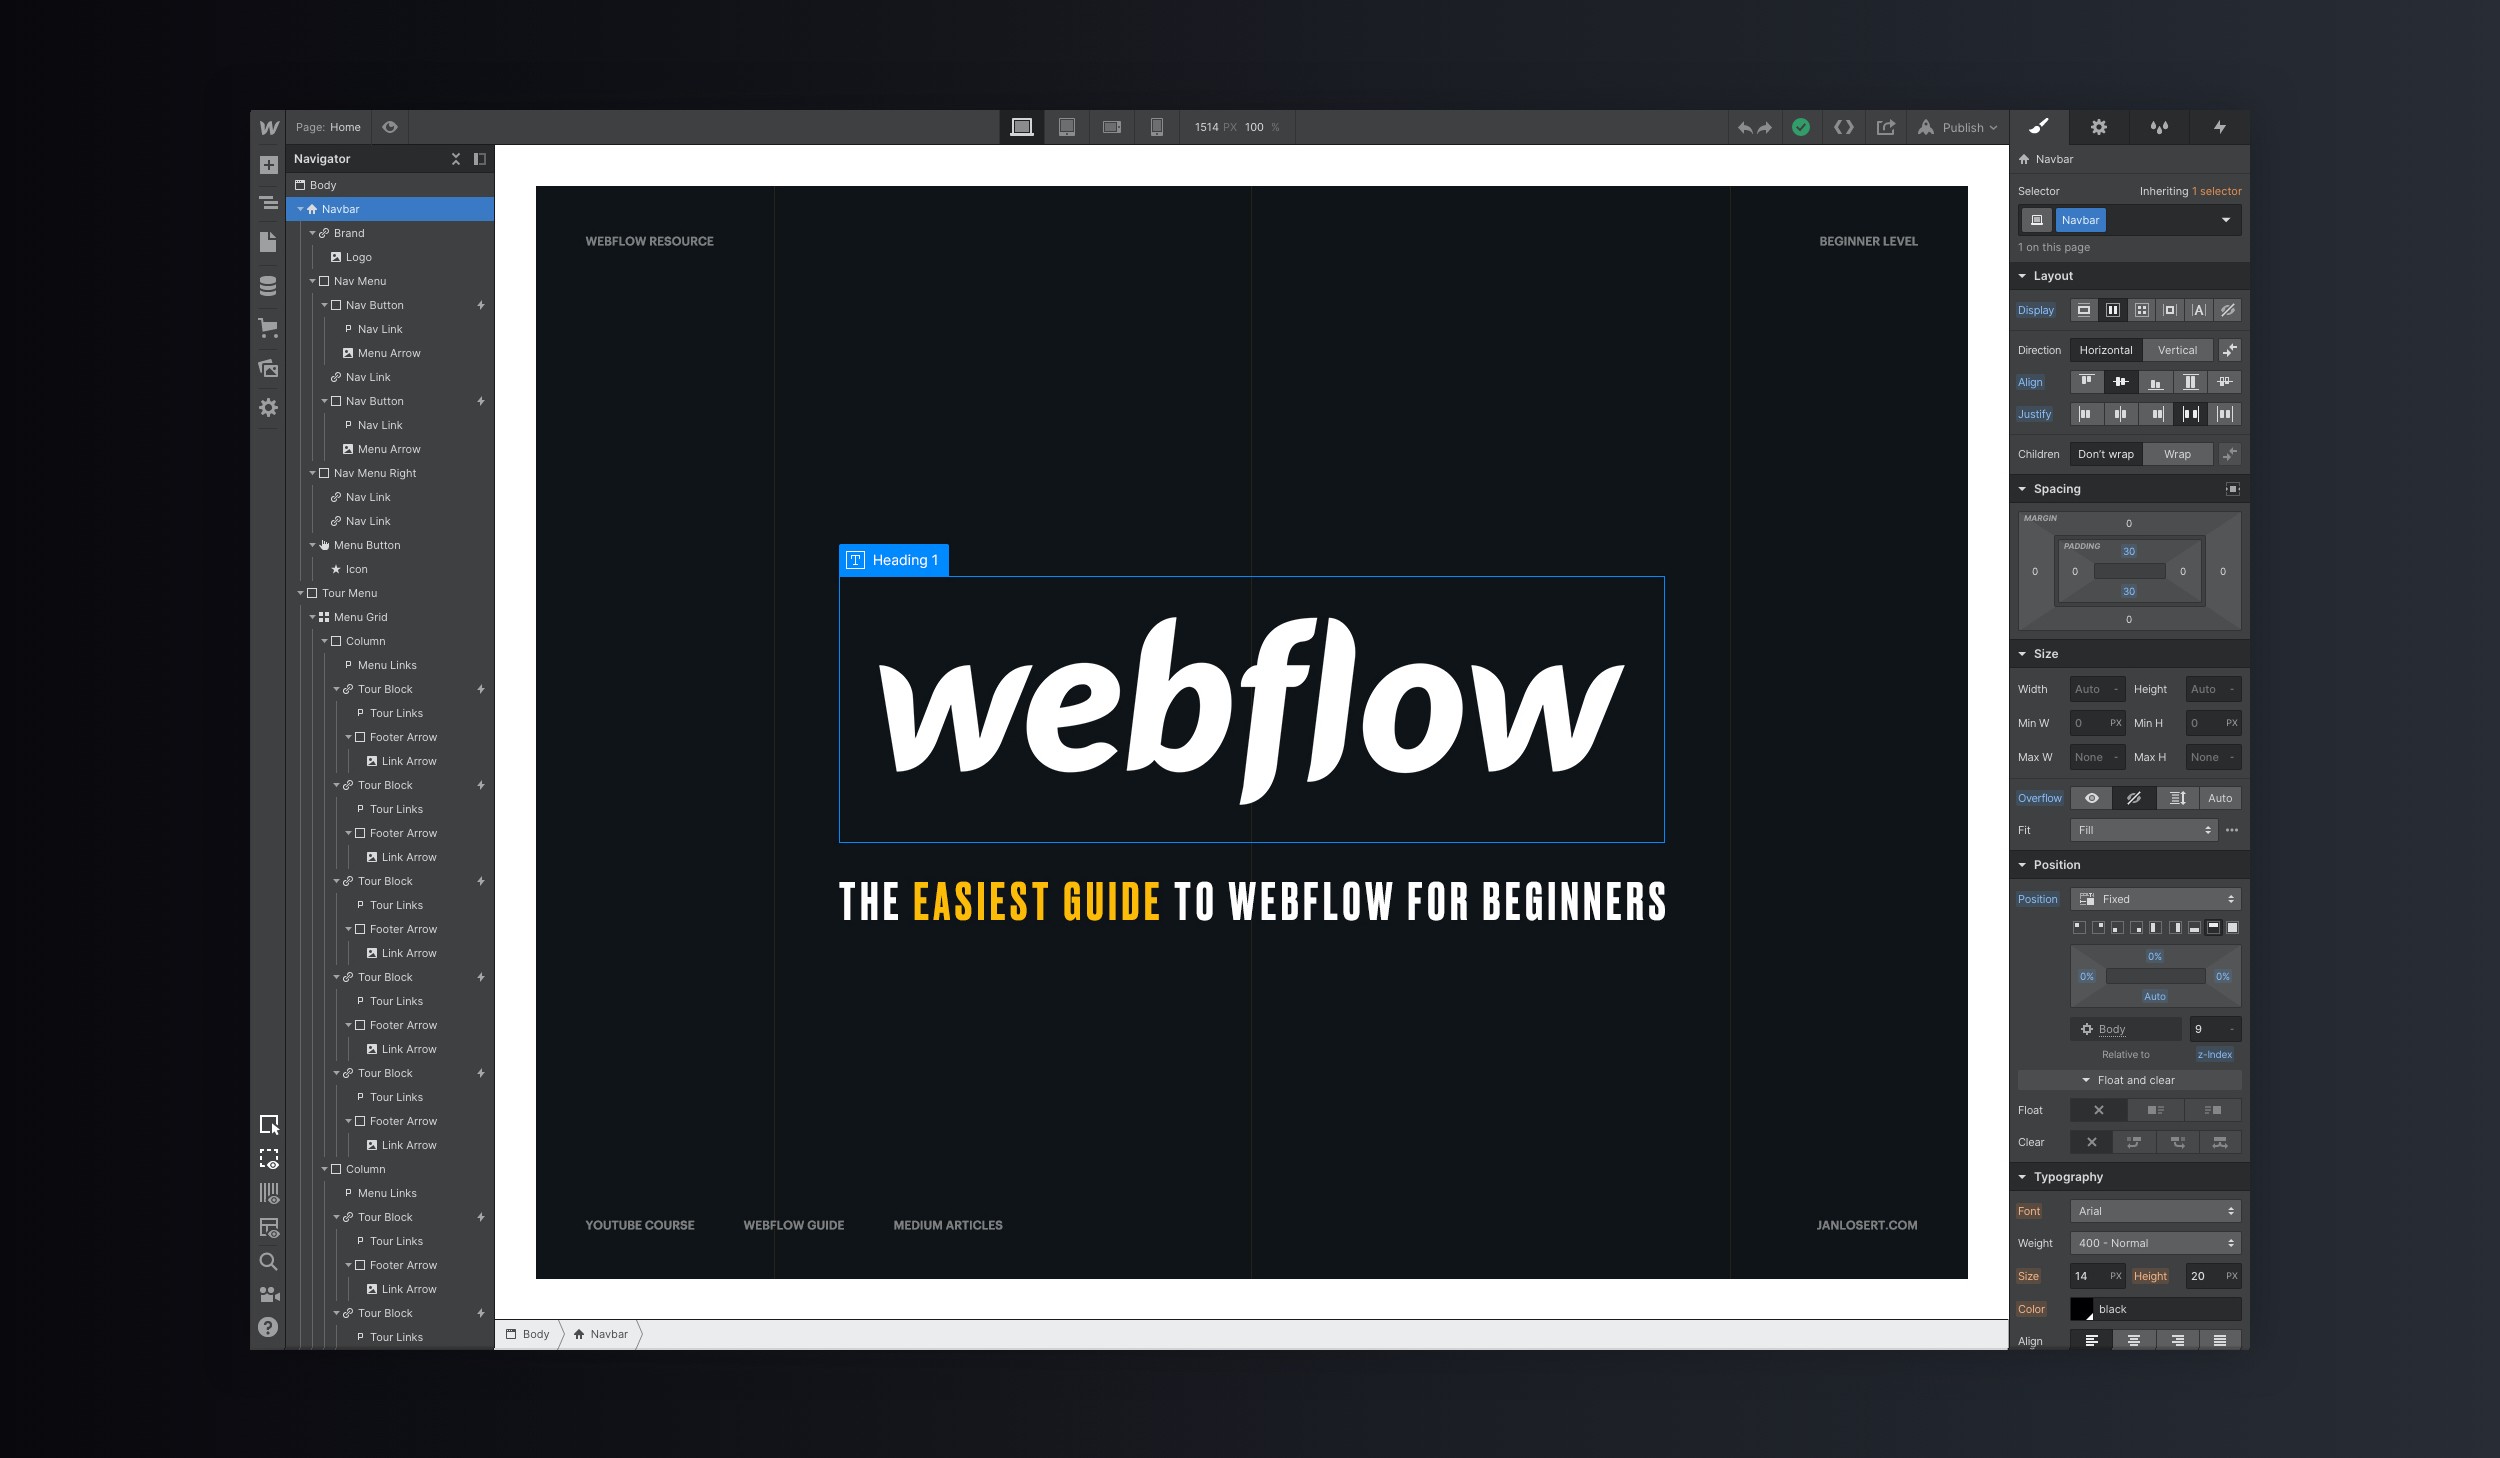 The WebFlow interface
with an element tree on the left
and GUI for CSS on the right
and a big window showing
the webflow logo and tagline -
the easiest guide to WebFlow for beginners
